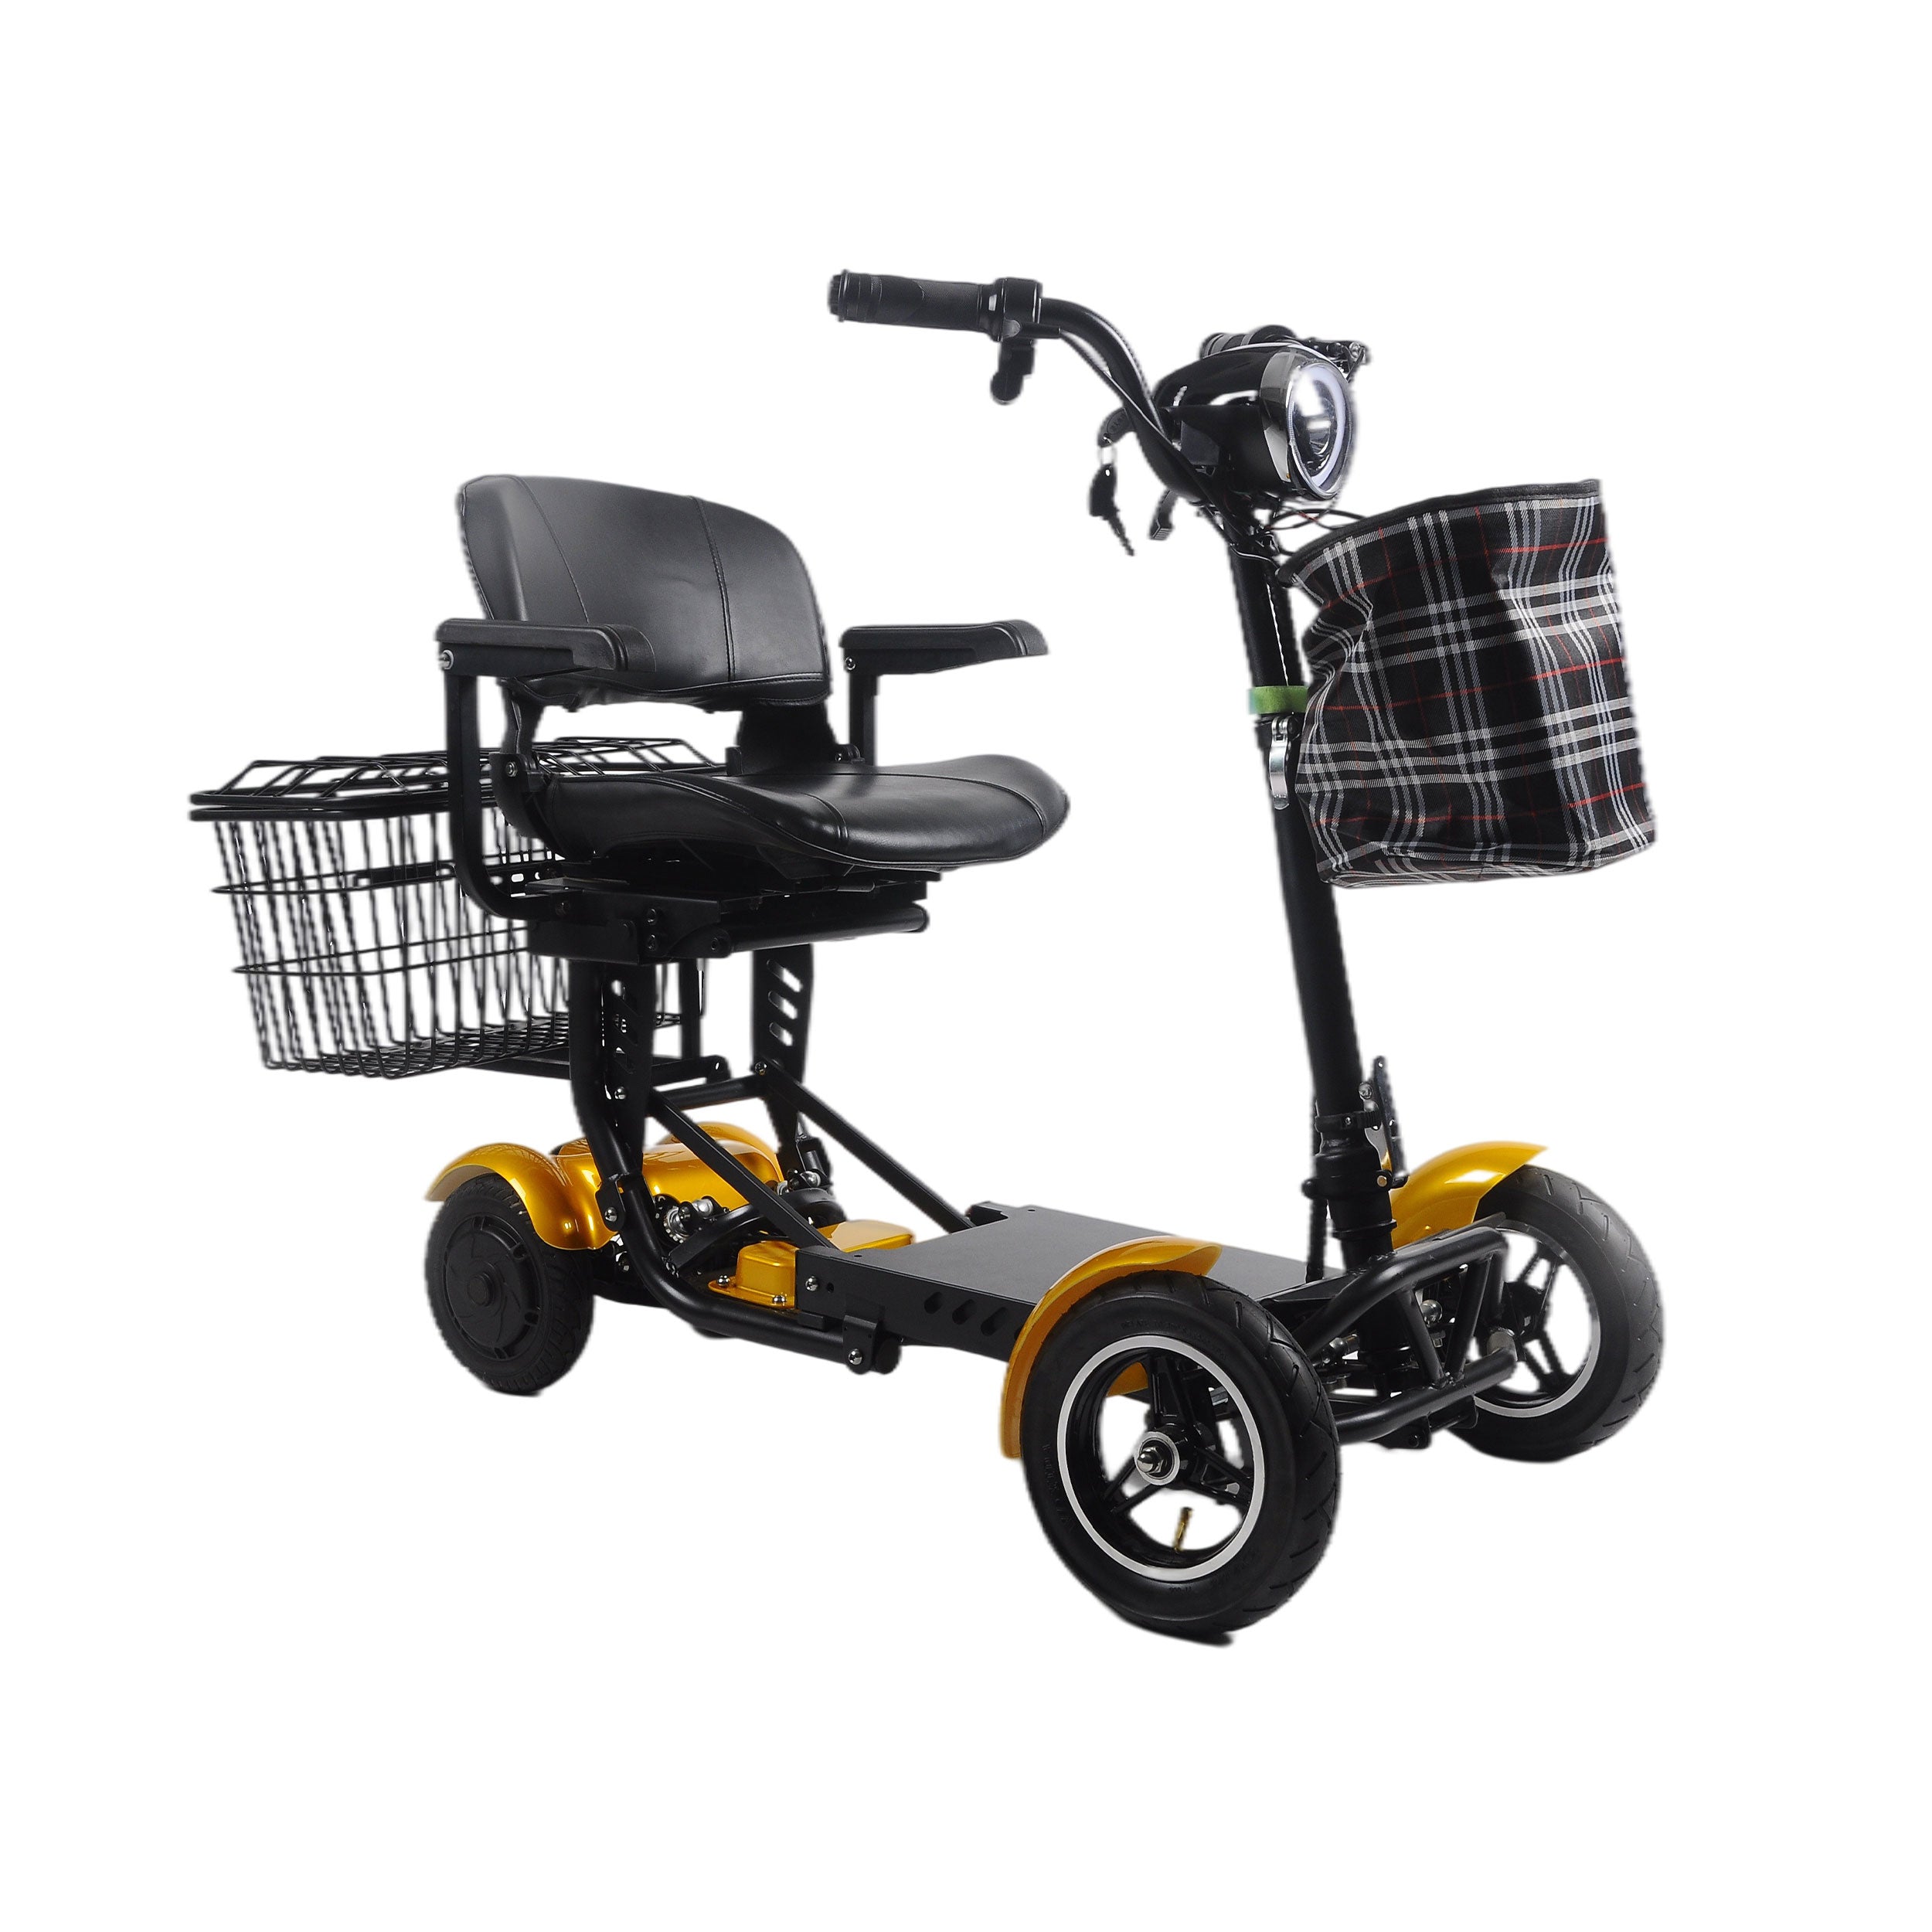 Rubicon electric scooter handicap